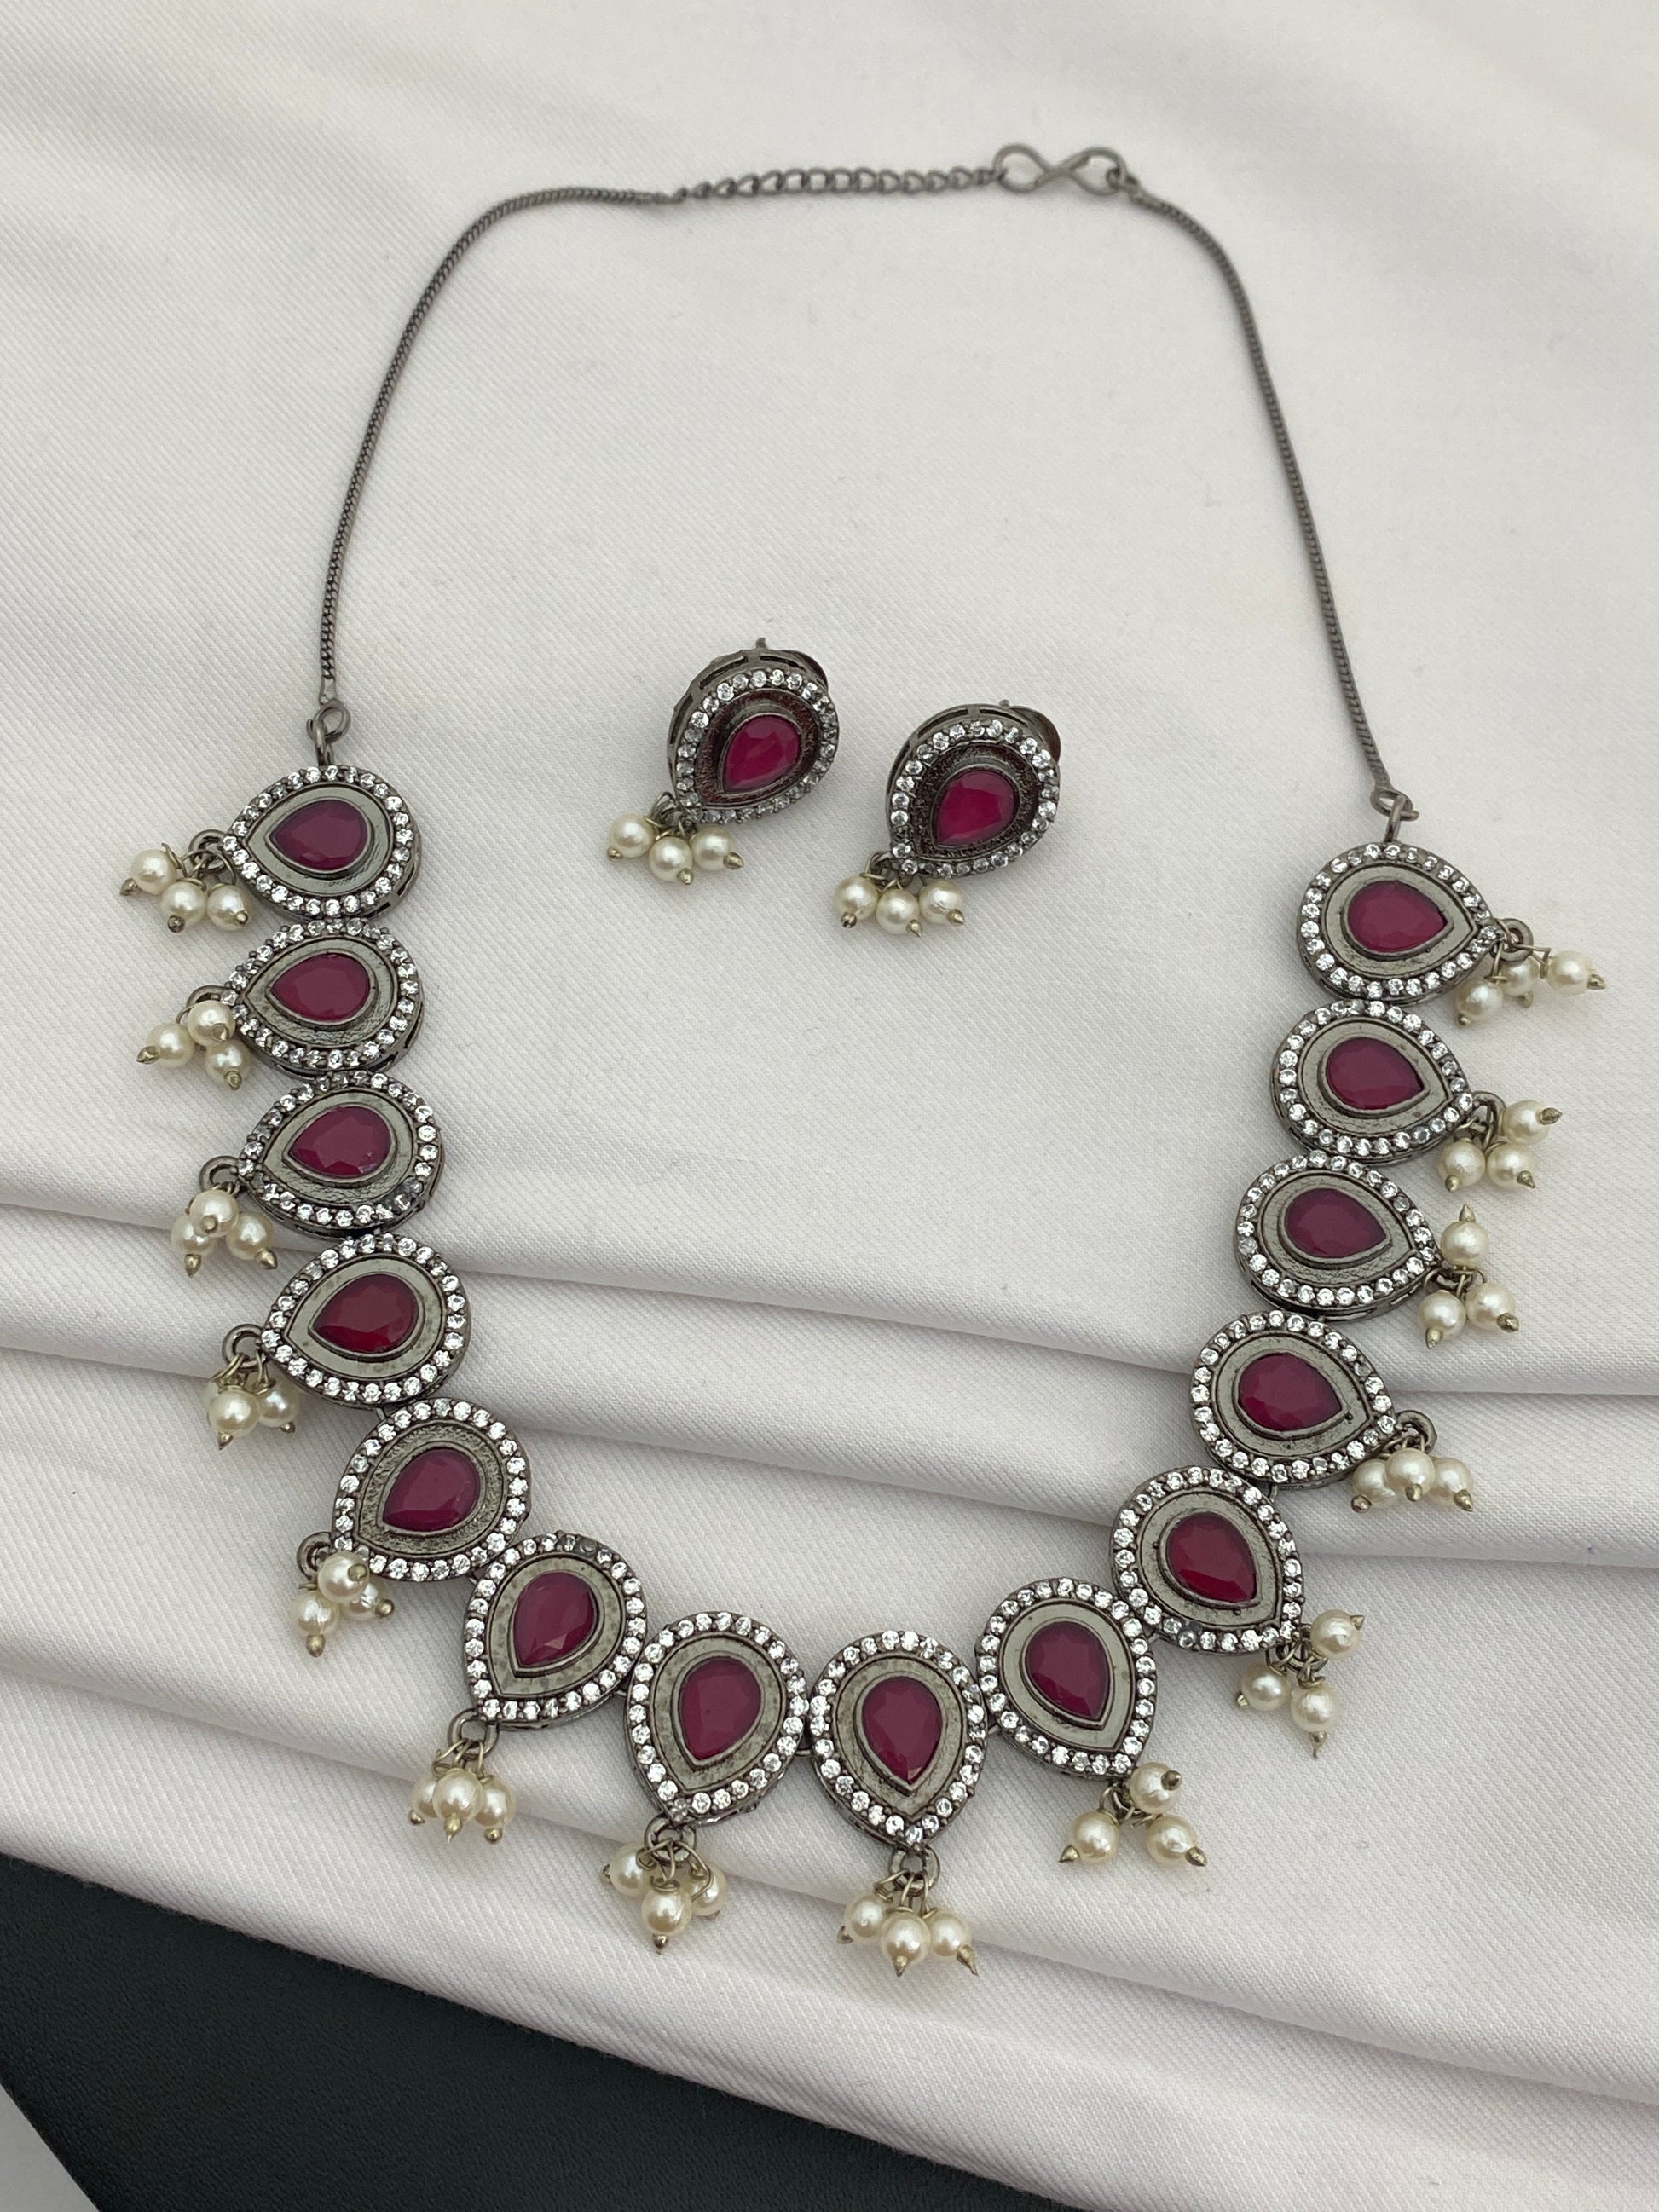  Pearl Beaded Oxidized Silver Necklace Set With Earrings Near me